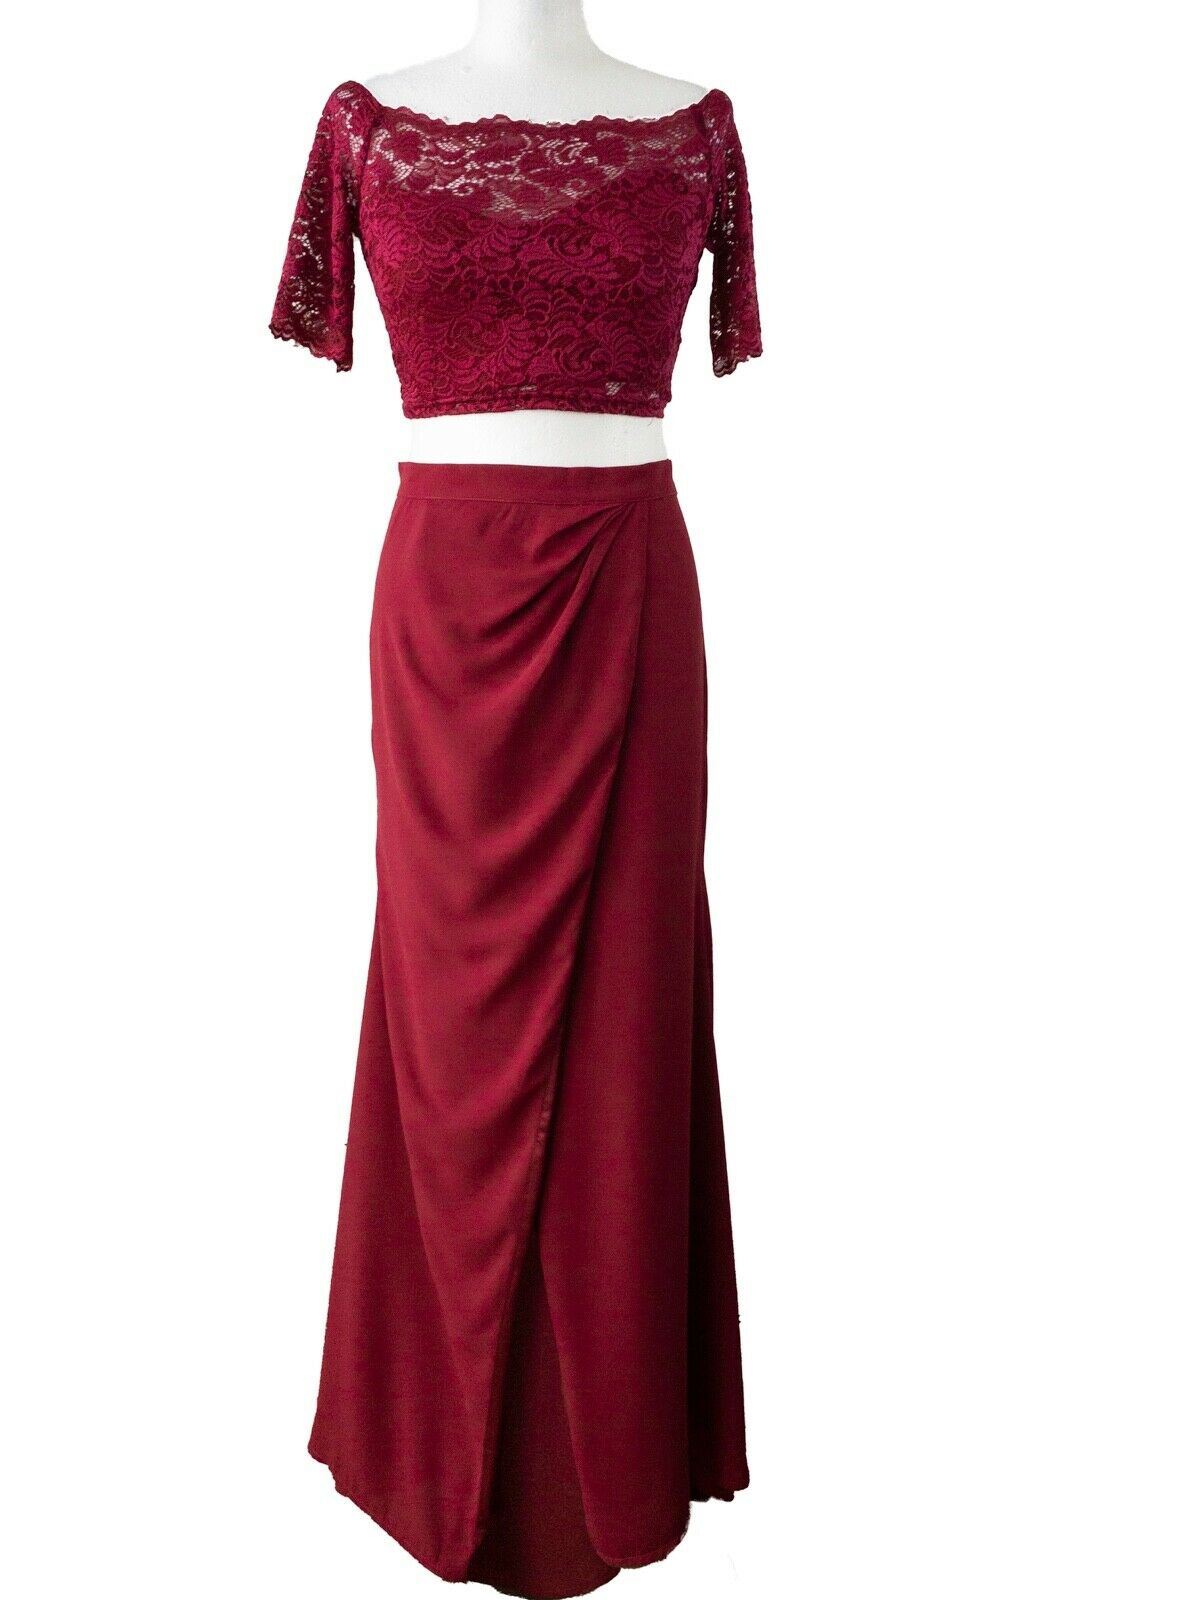 Miss Holly 2-piece Skirt and Lace Crop Top Burgundy Sizes